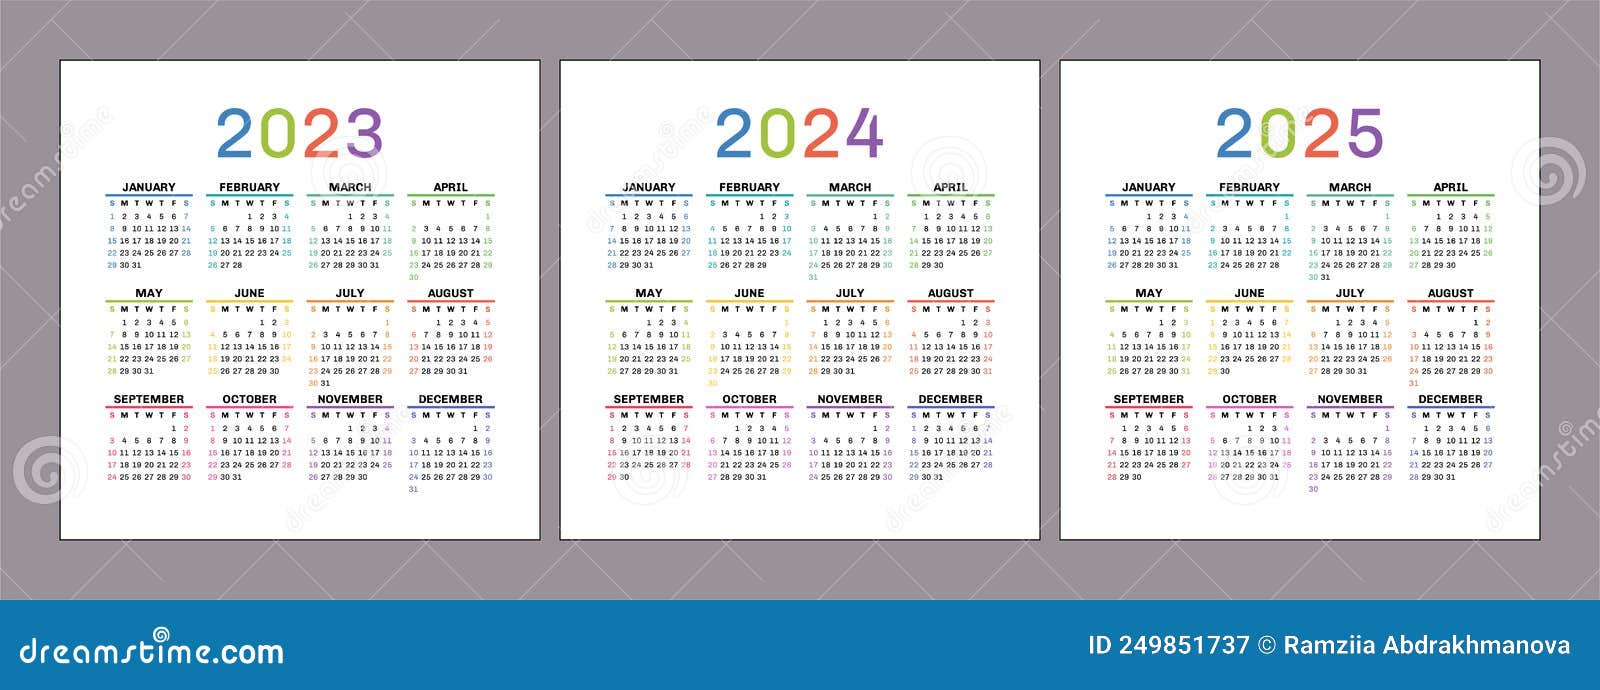 Calendar 2023, 2024 and 2025 Years. Square Vector Calender Design